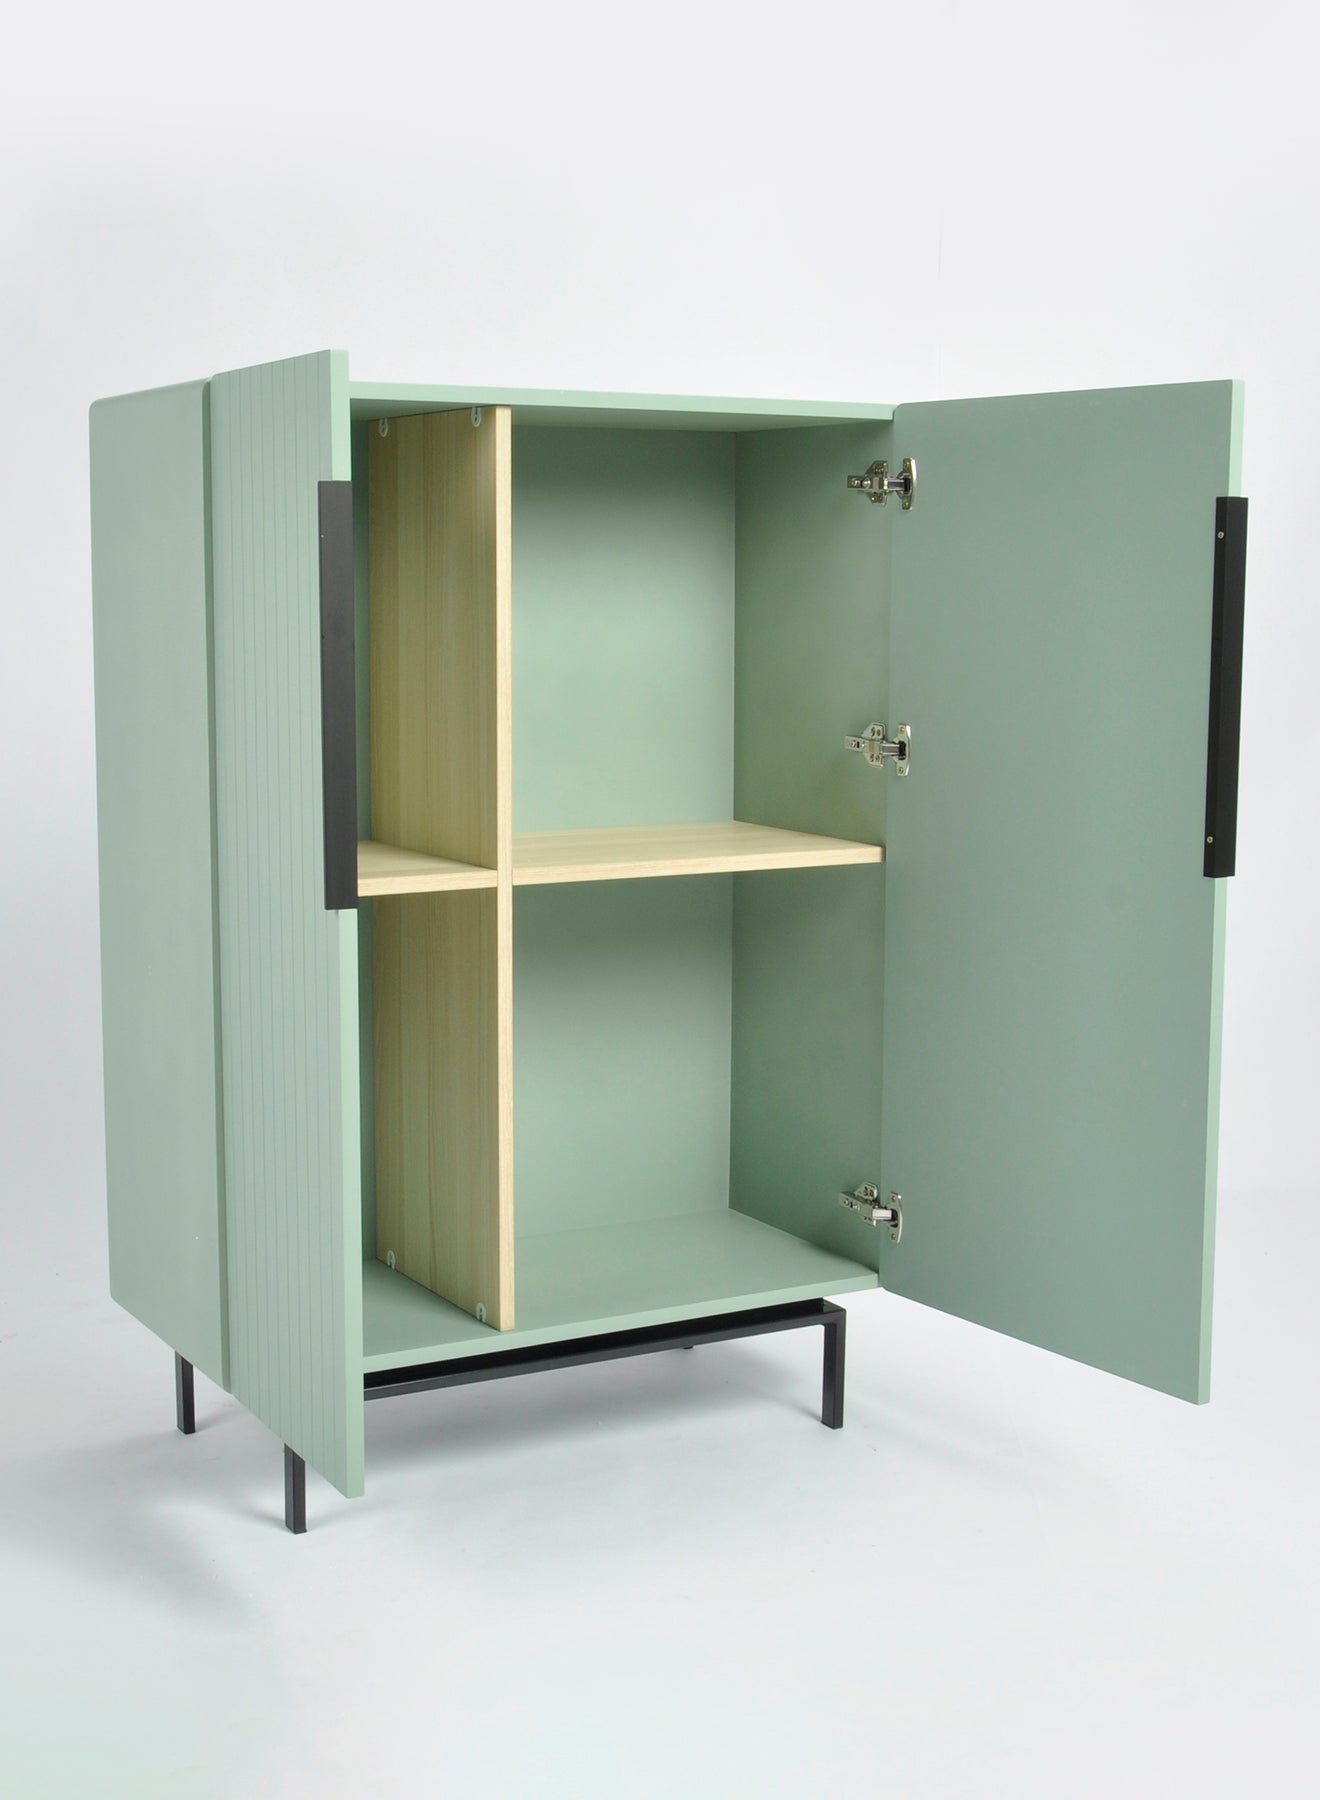 Buffet Table By In A Green Color - Size 90 X 41 X 127 - Cabinet For Storage 